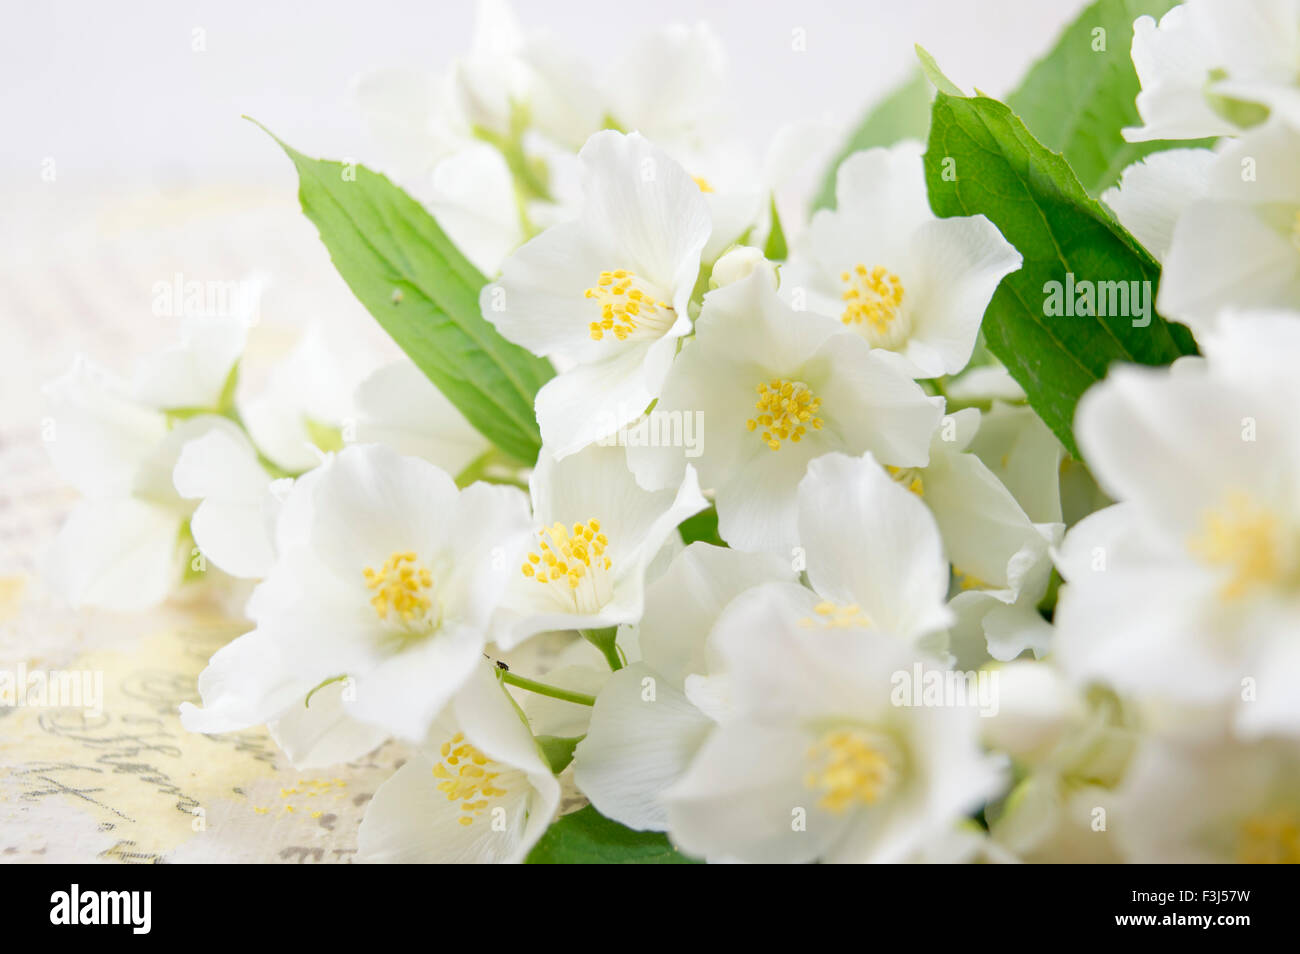 Natural fresh lily flowers on a decoupage decorated table Stock Photo